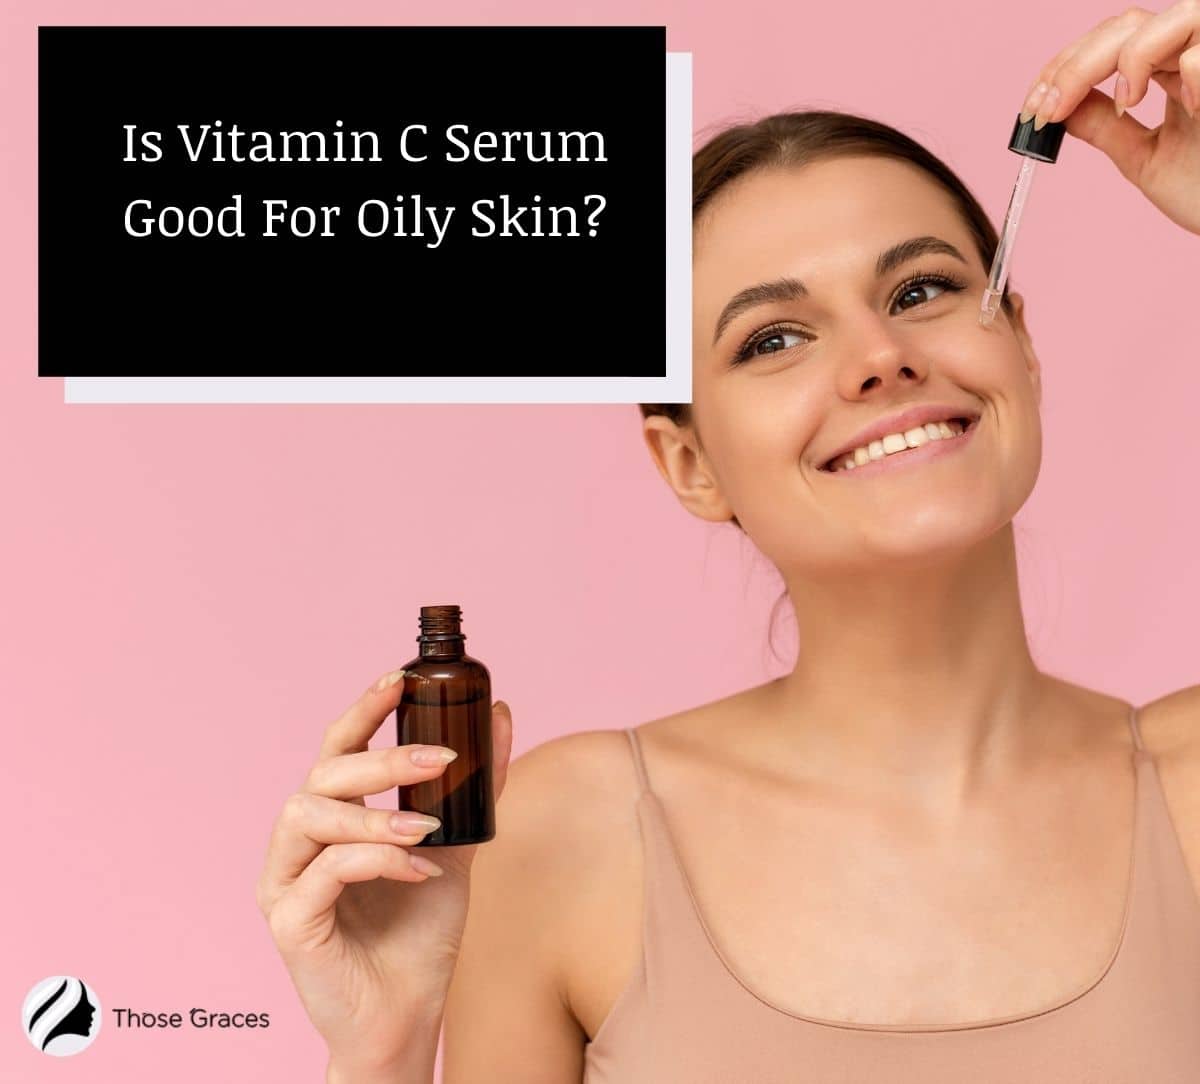 lady putting vitamin c serum on her face